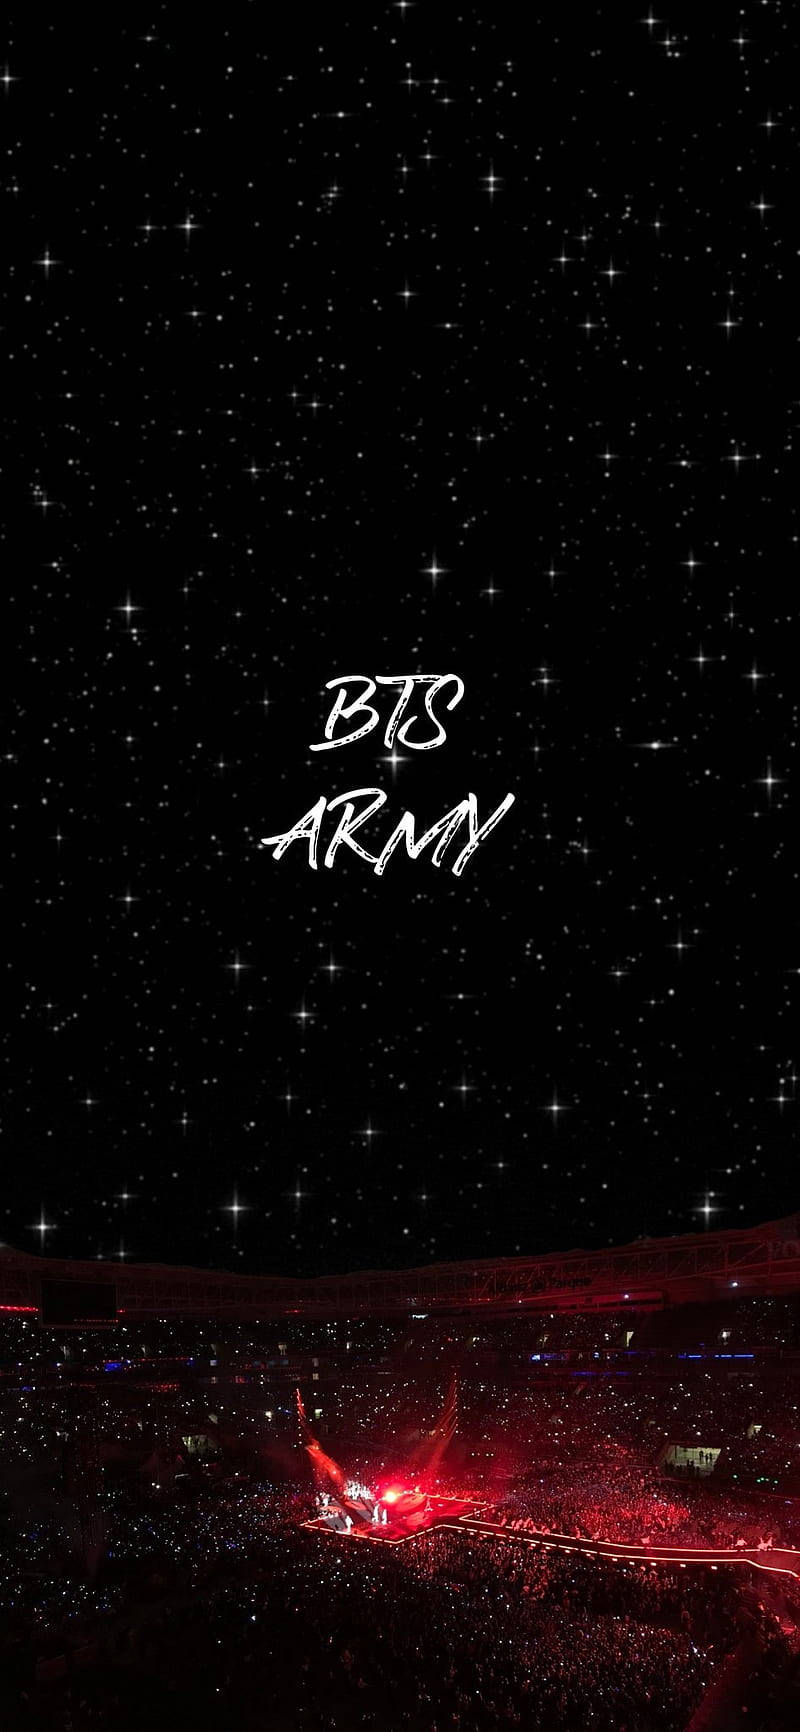 BTS Concert With The Words BTS And Army Wallpaper